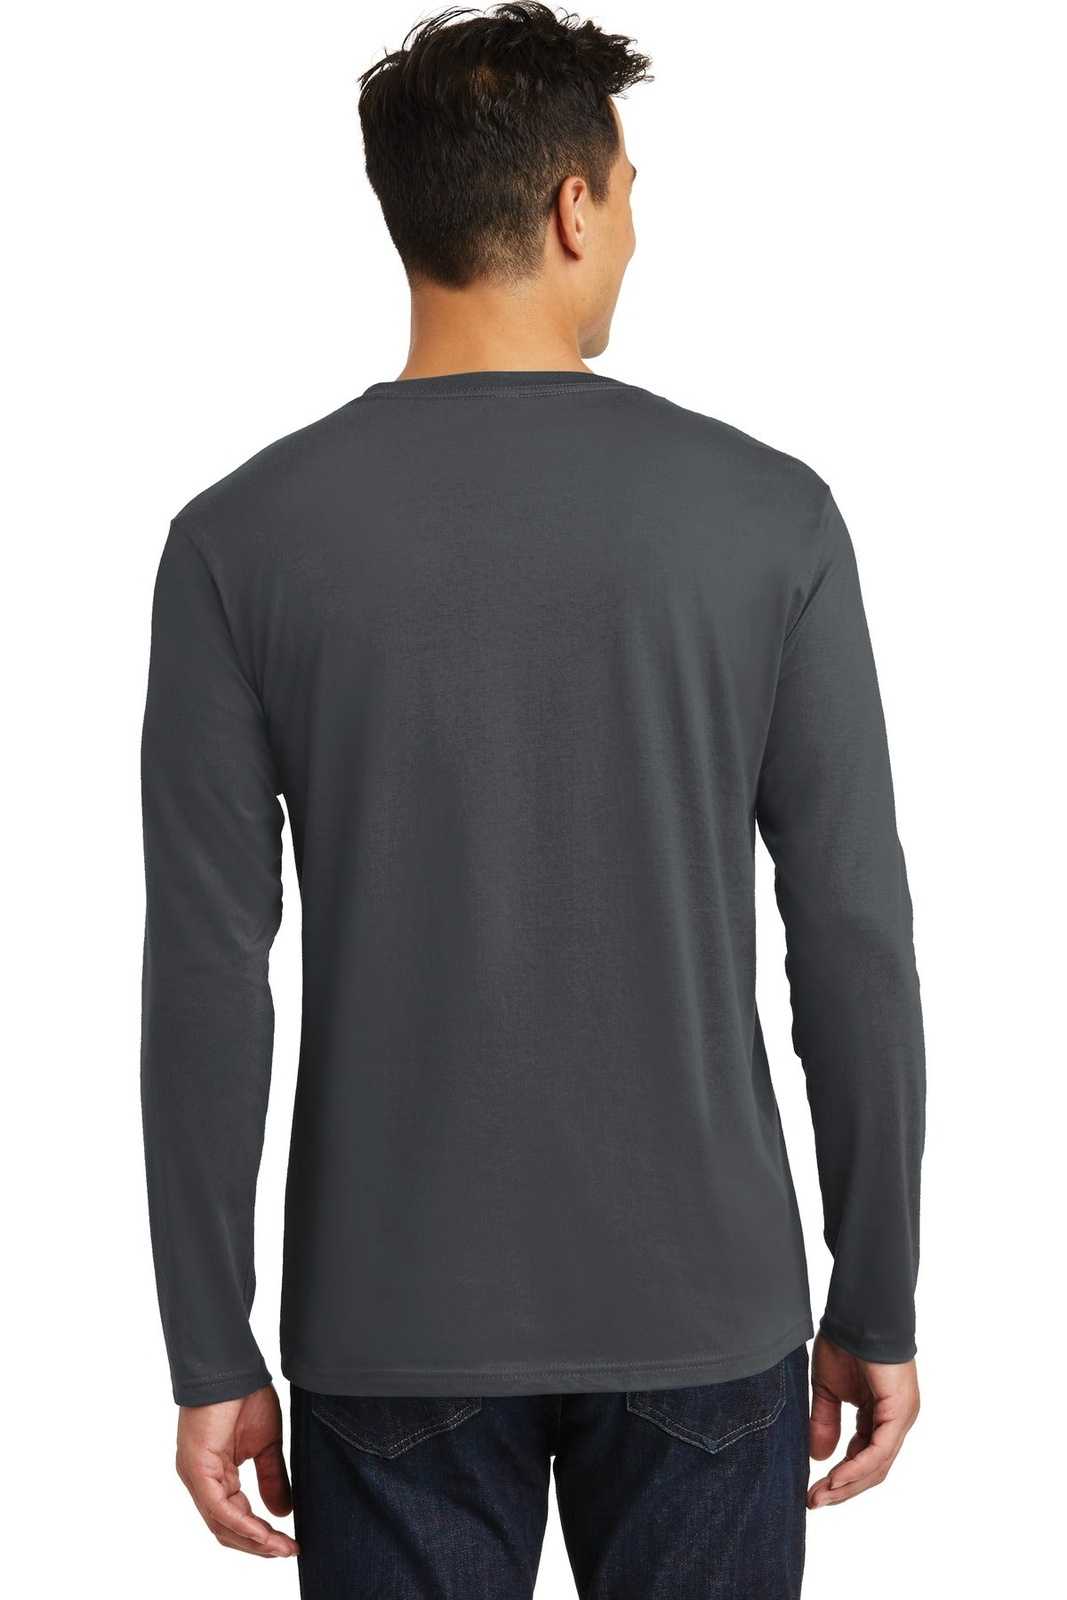 District DT105 Perfect Weight Long Sleeve Tee - Charcoal - HIT a Double - 2